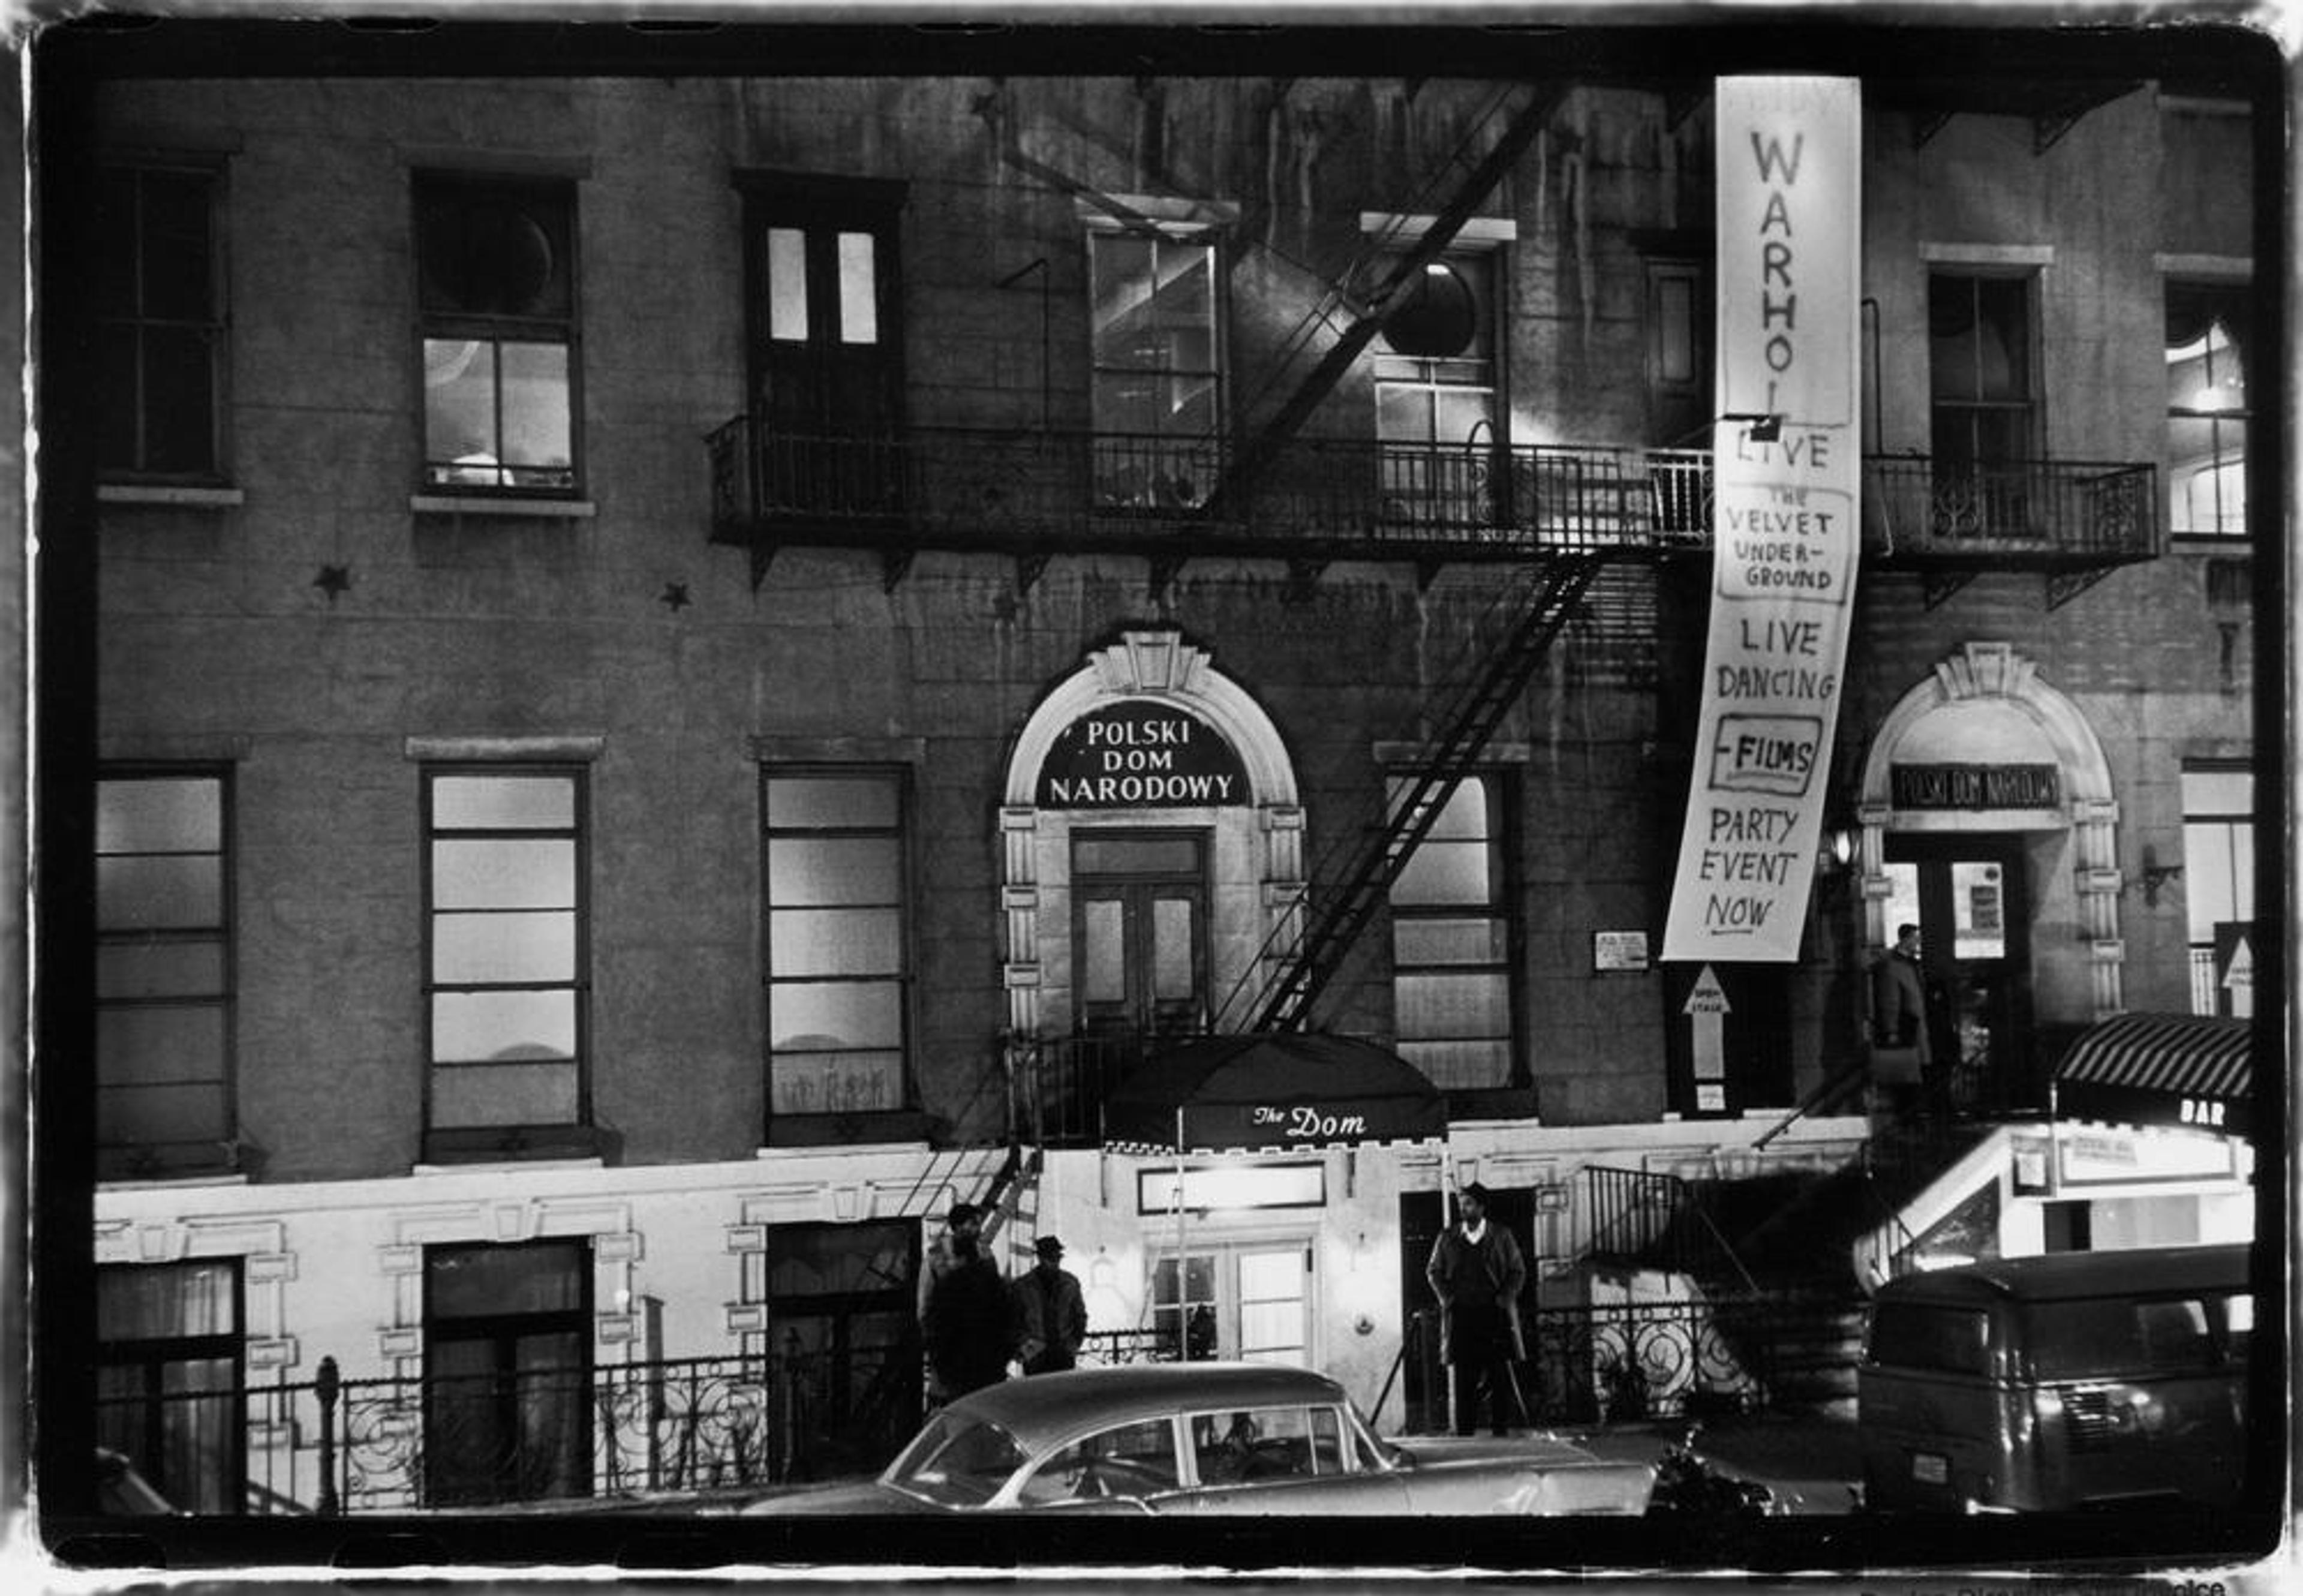 Polski Dam Nardowy (Polish National Home) at 23 St Mark&#39;s Place, above Stanley Tolkin&#39;s Dom Bar and under Andy Warhol&#39;s Mod-Dom, home to his clubnight, The Exploding Plastic Inevitable Photo by Fred W. McDarrah in 1966